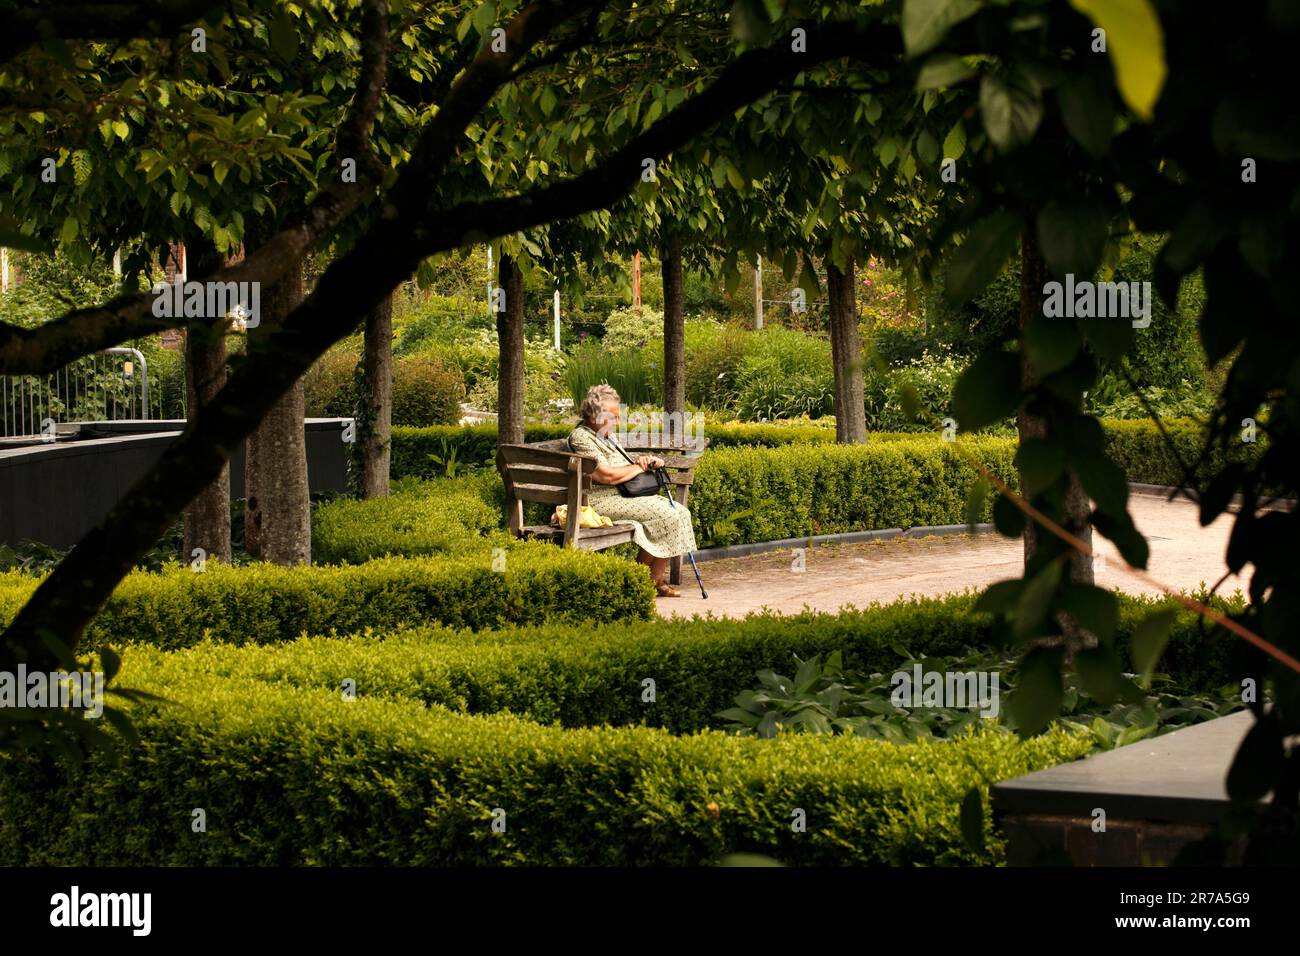 Retired lady takes a moment of contemplation amongst the greenery and tranquility of the National Botanic Gardens of Wales. Stock Photo